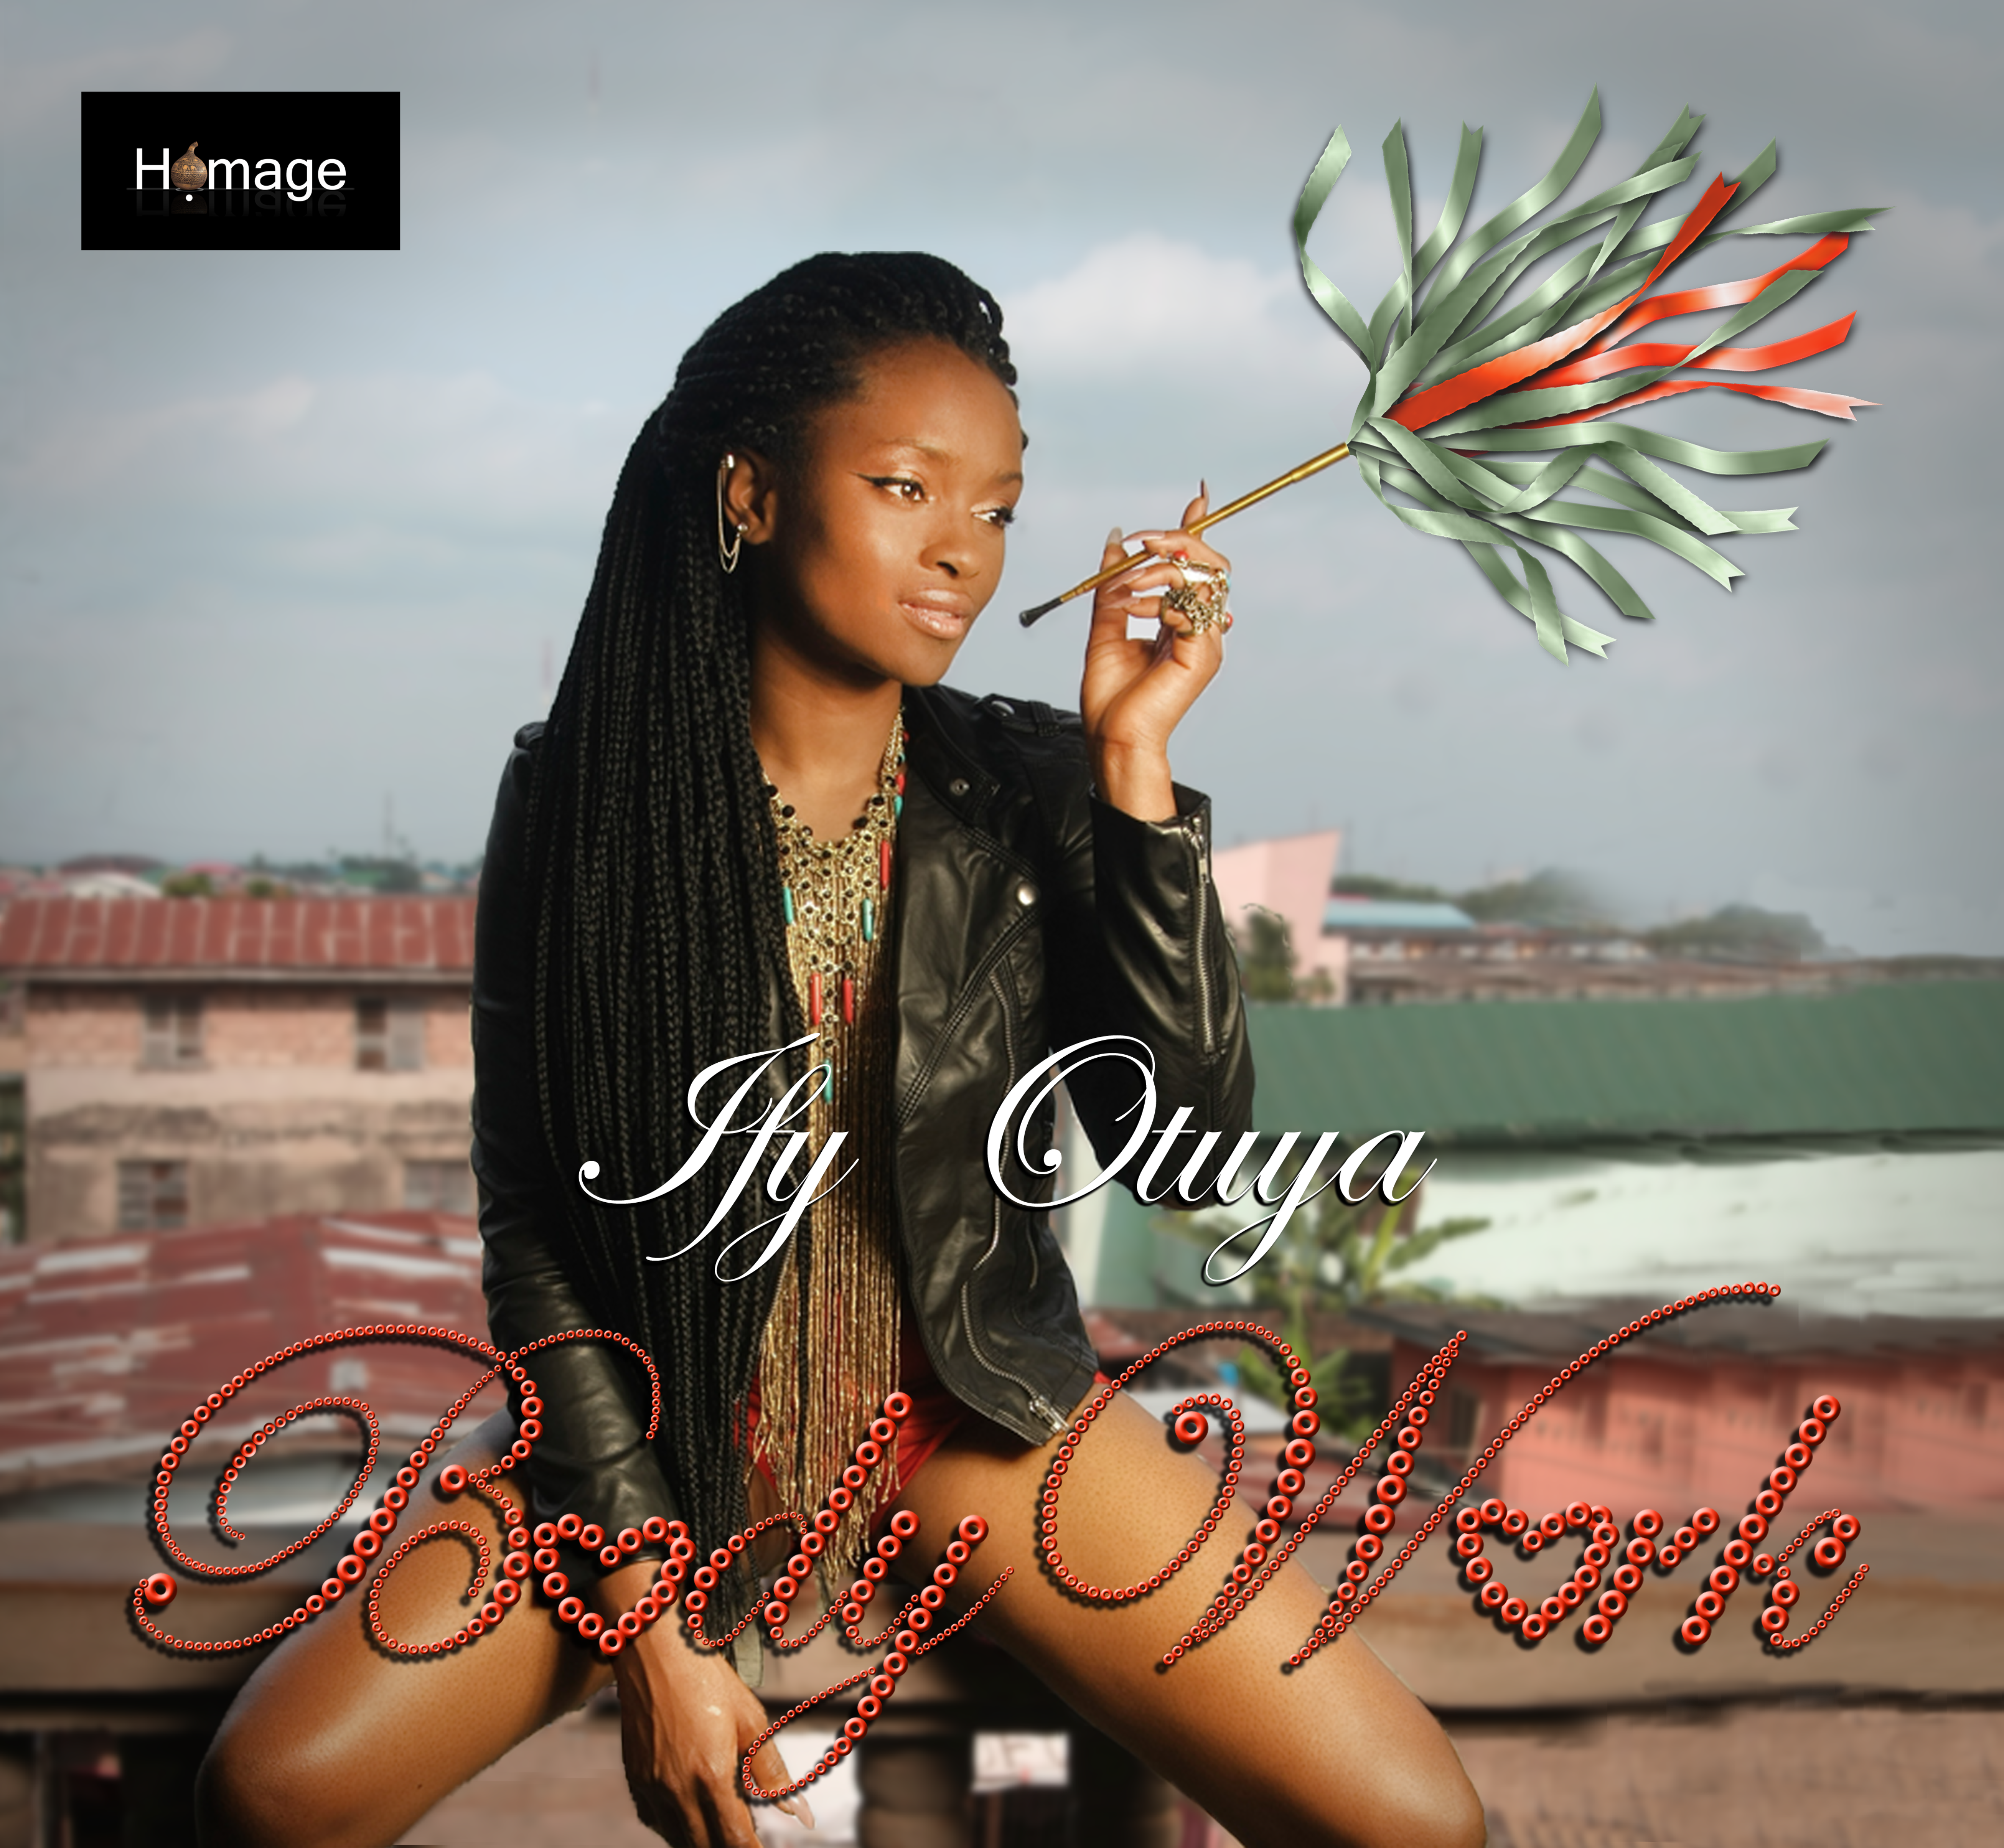 Ify Otuya on the cover of afrobeats song Body Work, sitting with legs apart on a wall and holding a gold pipe/ tube.